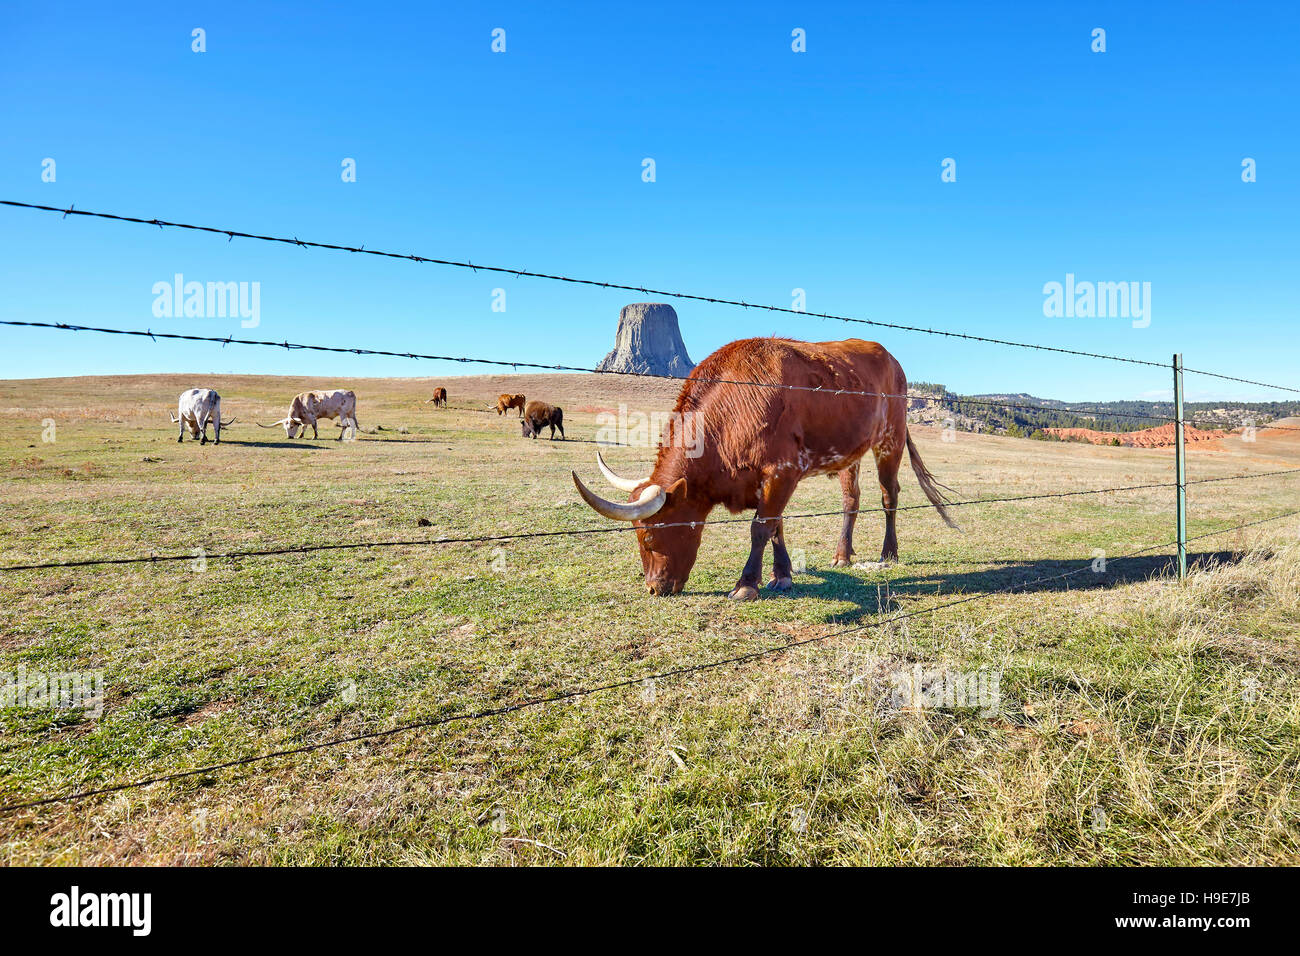 Cattle behind barbed wire fence with Devils Tower in distance, top attraction in Wyoming State, USA. Stock Photo